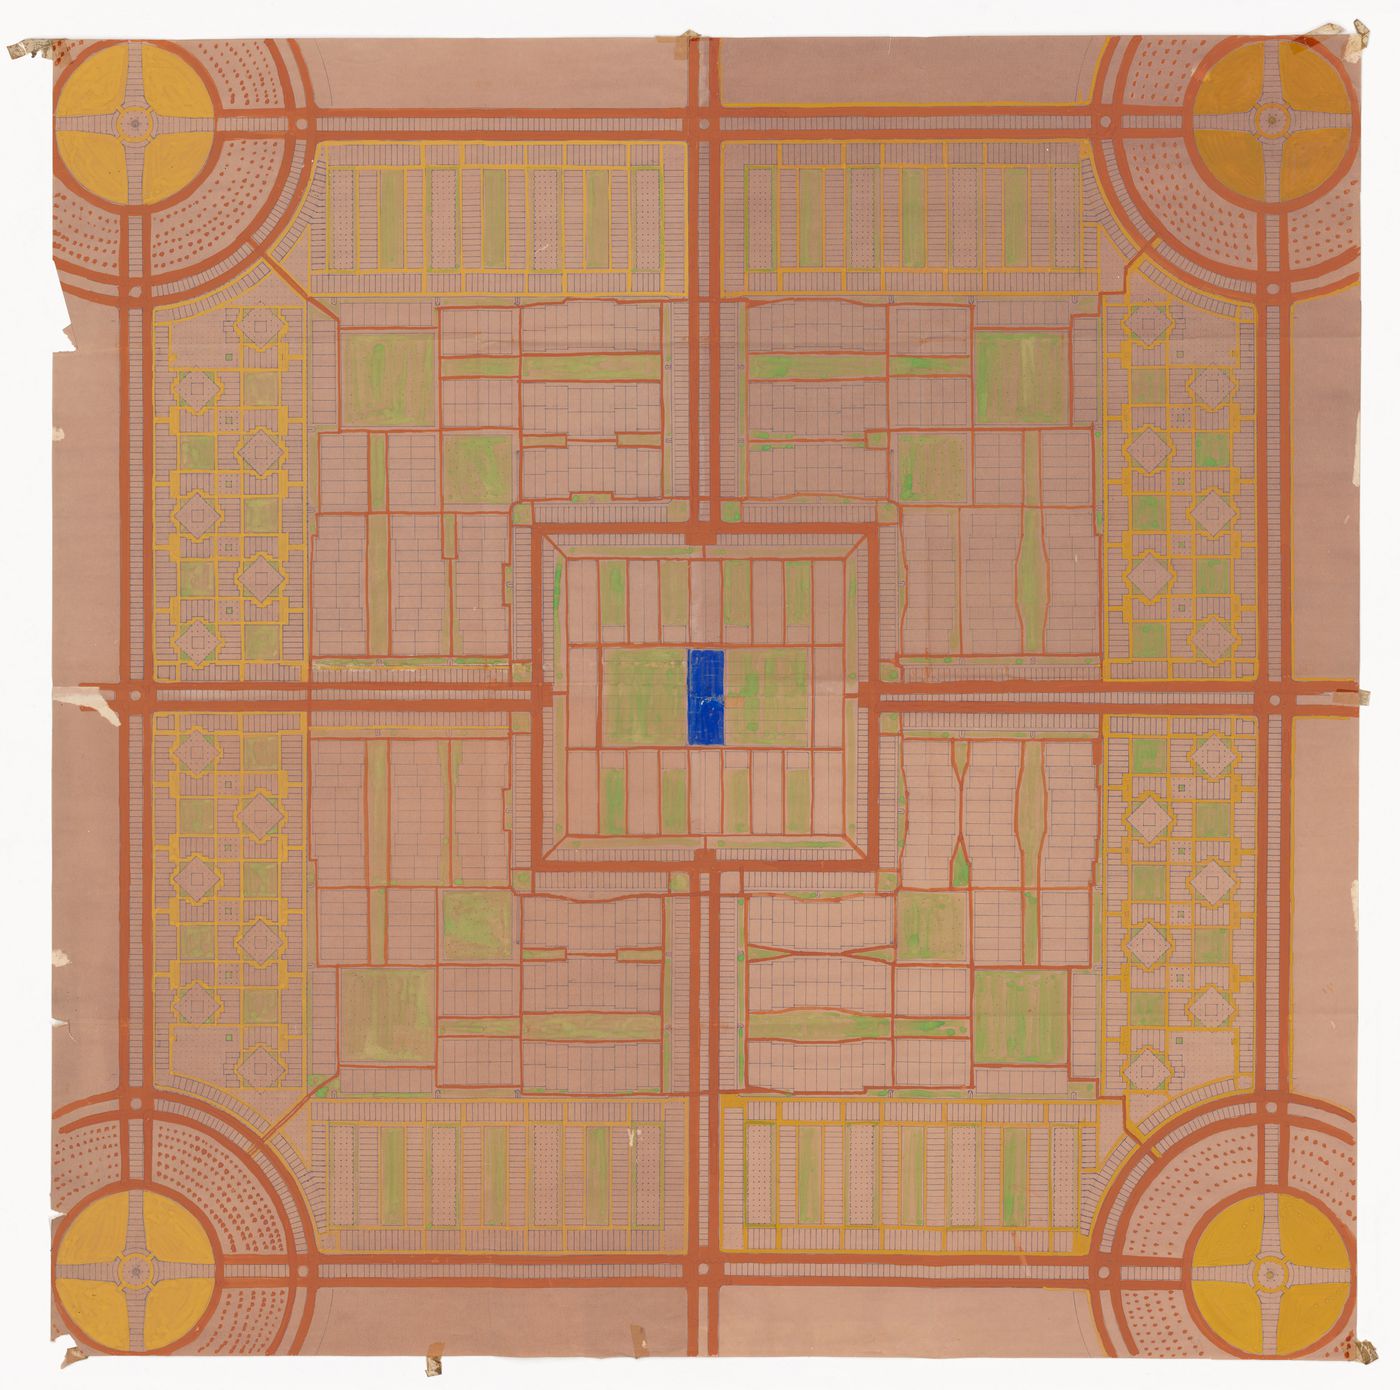 Plan of sector for Linear city, Chandigarh, India